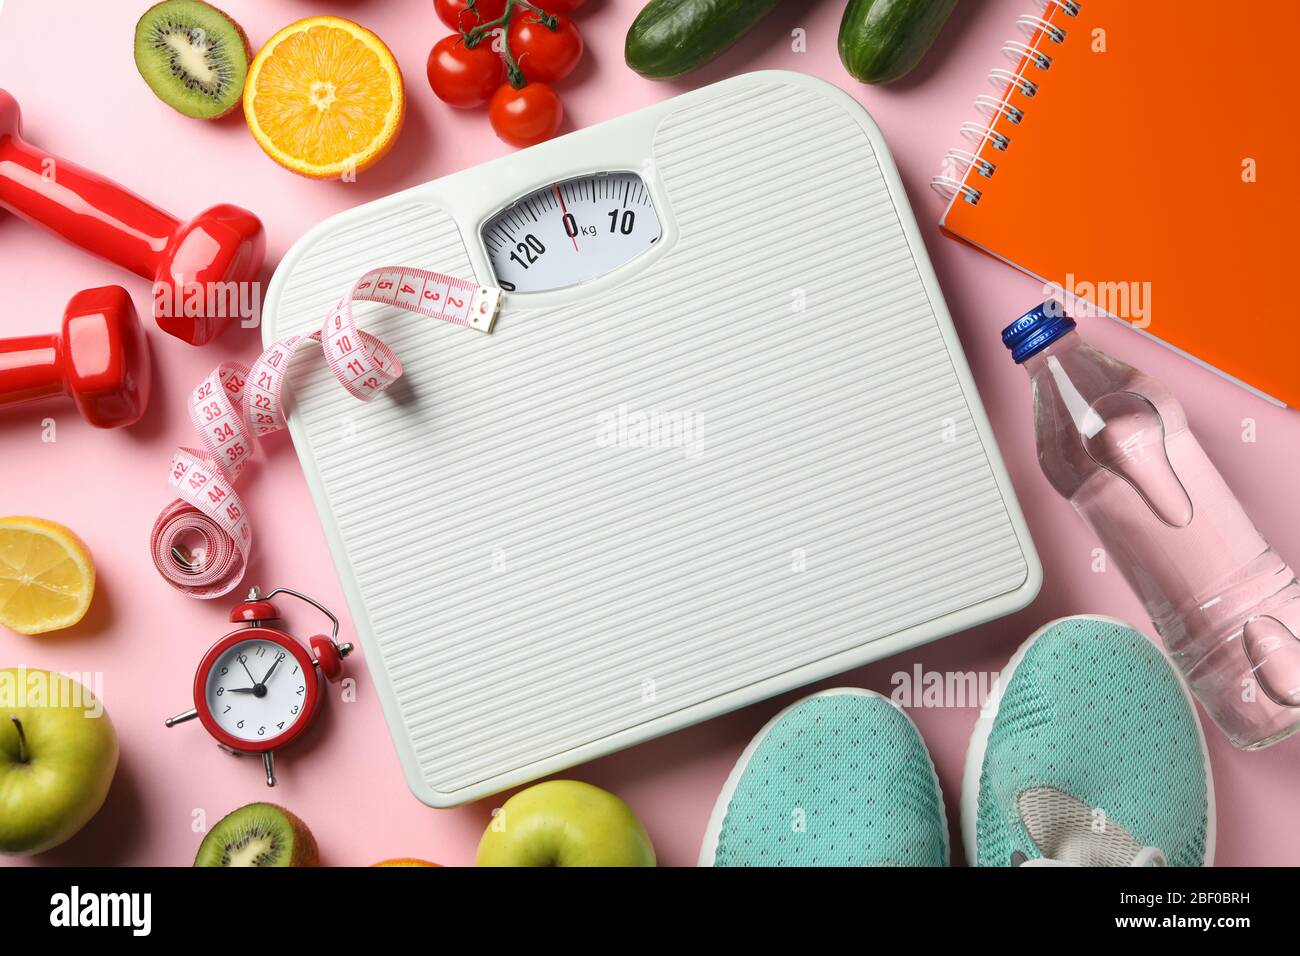 https://c8.alamy.com/comp/2BF0BRH/weight-loss-or-healthy-lifestyle-accessories-on-pink-background-2BF0BRH.jpg